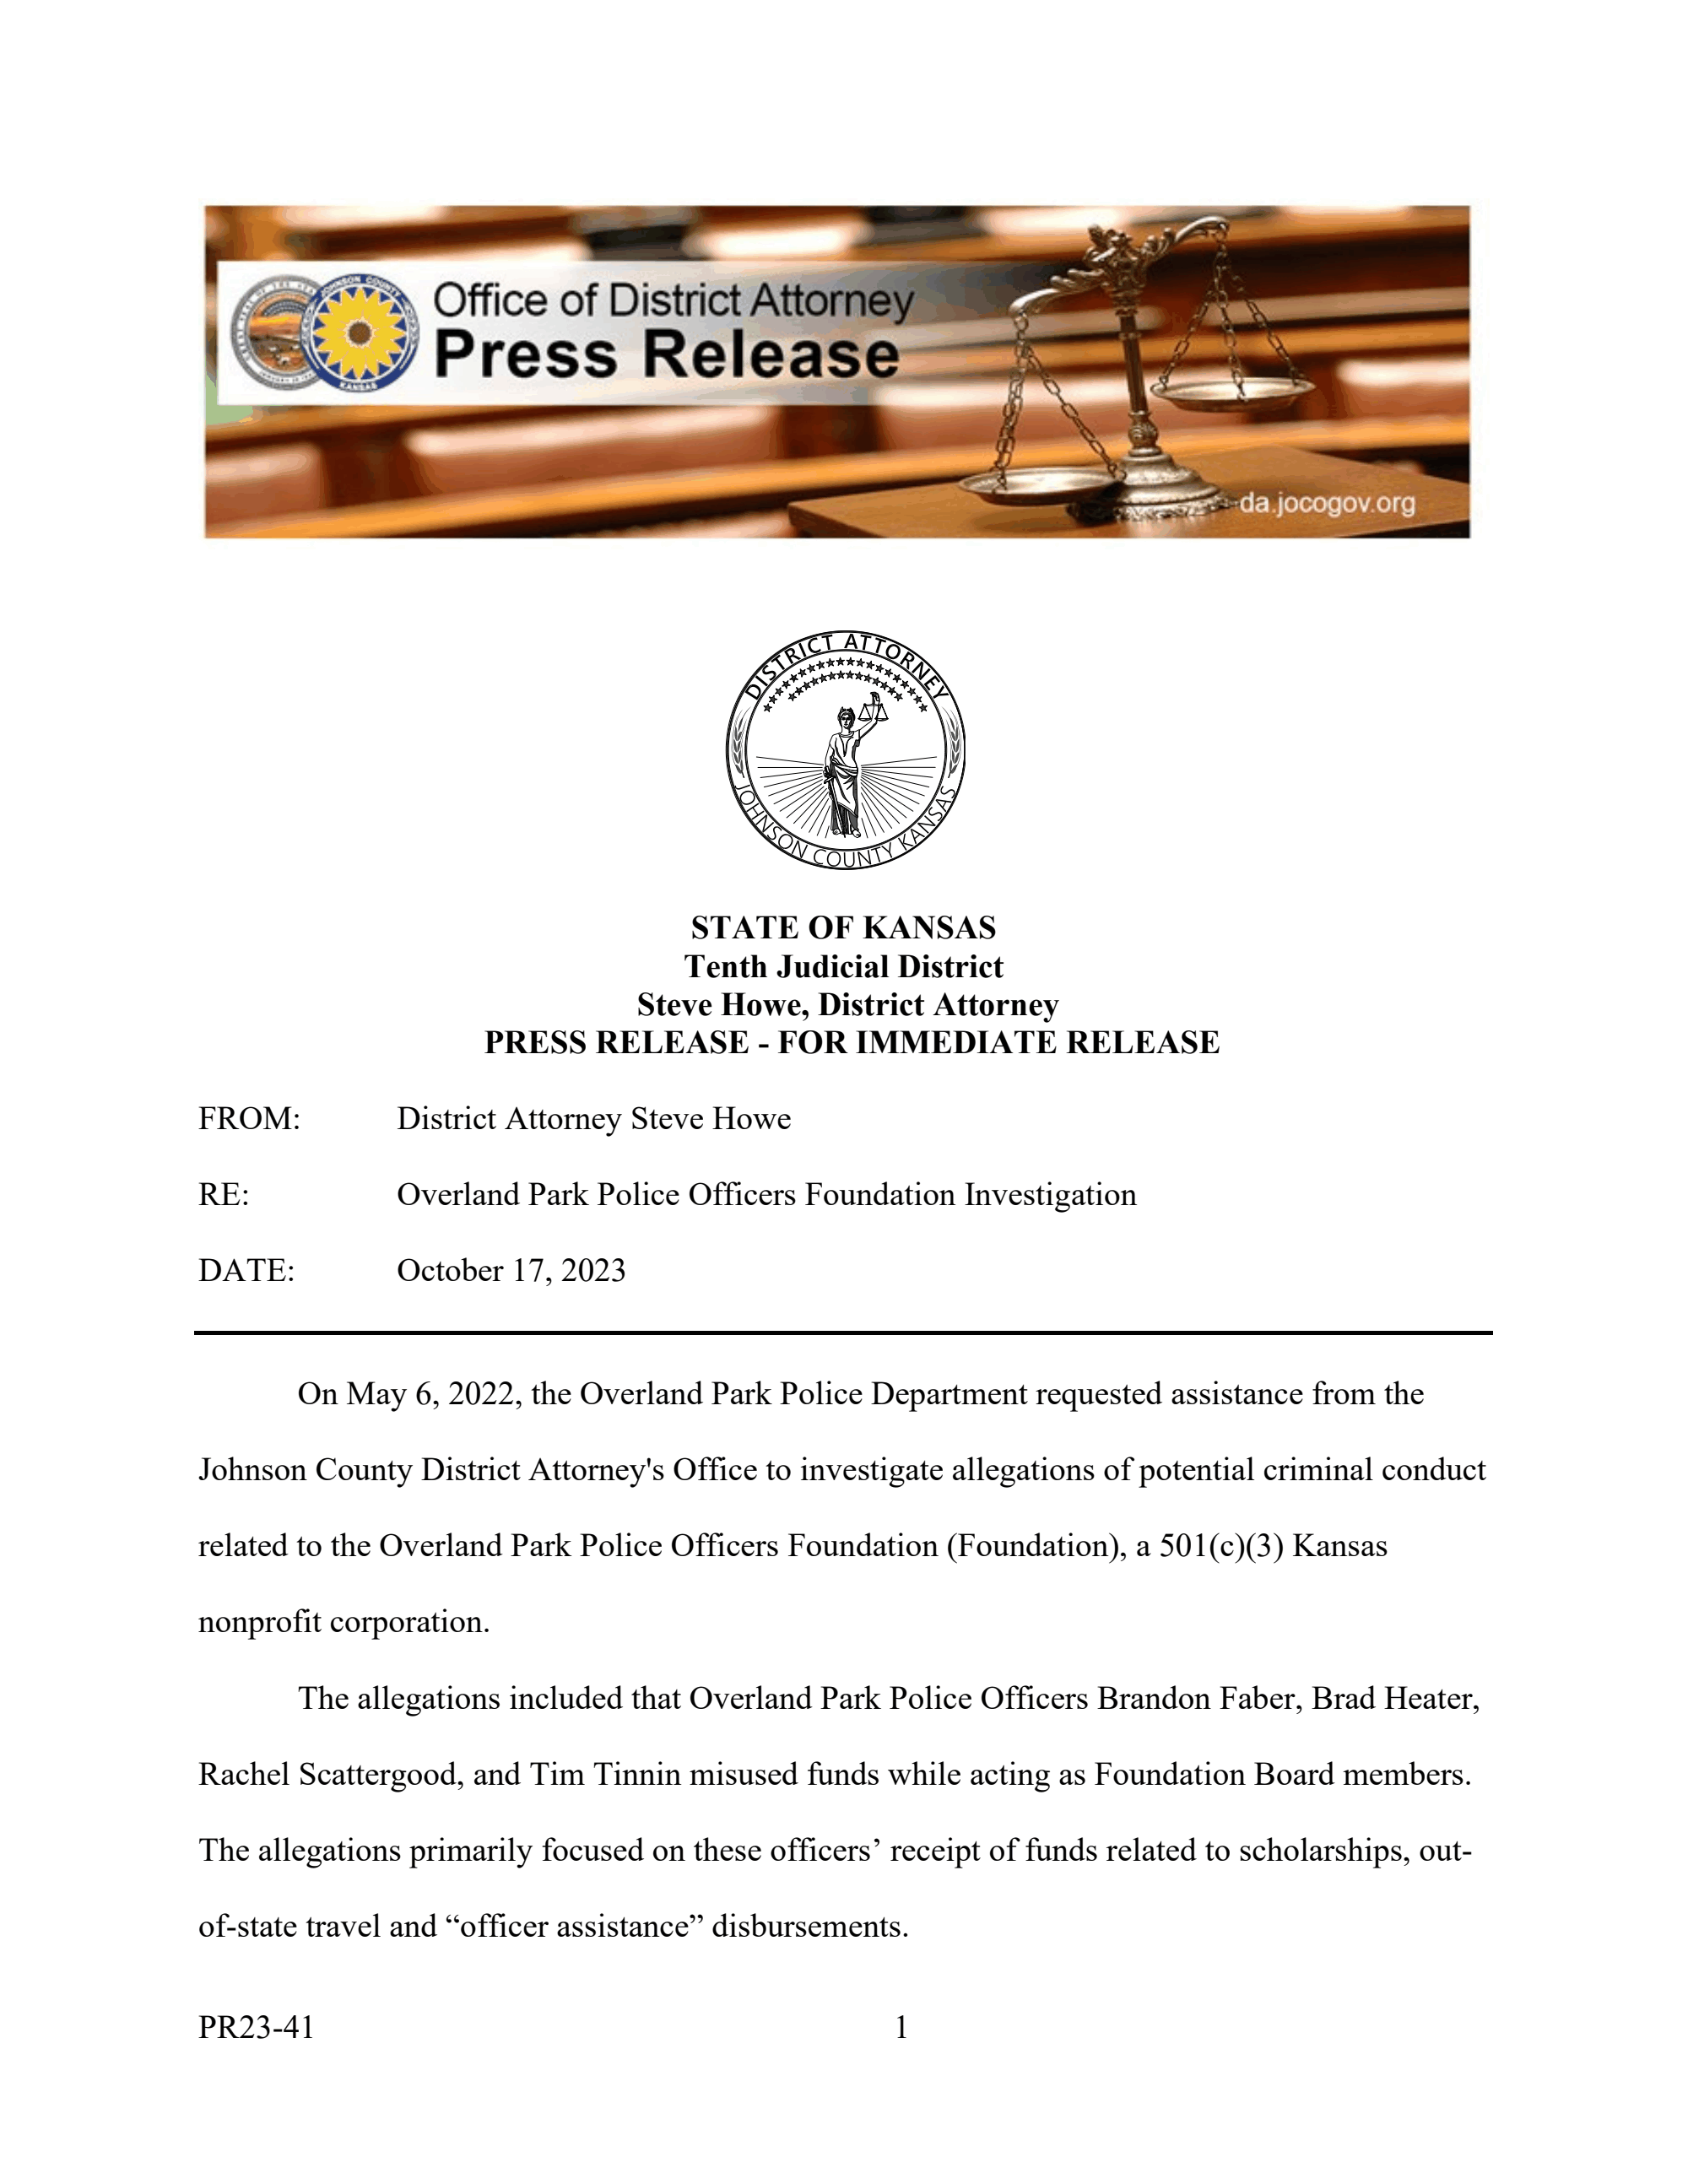 Page 1 of PR23-41-FOP-Investigation-Findings